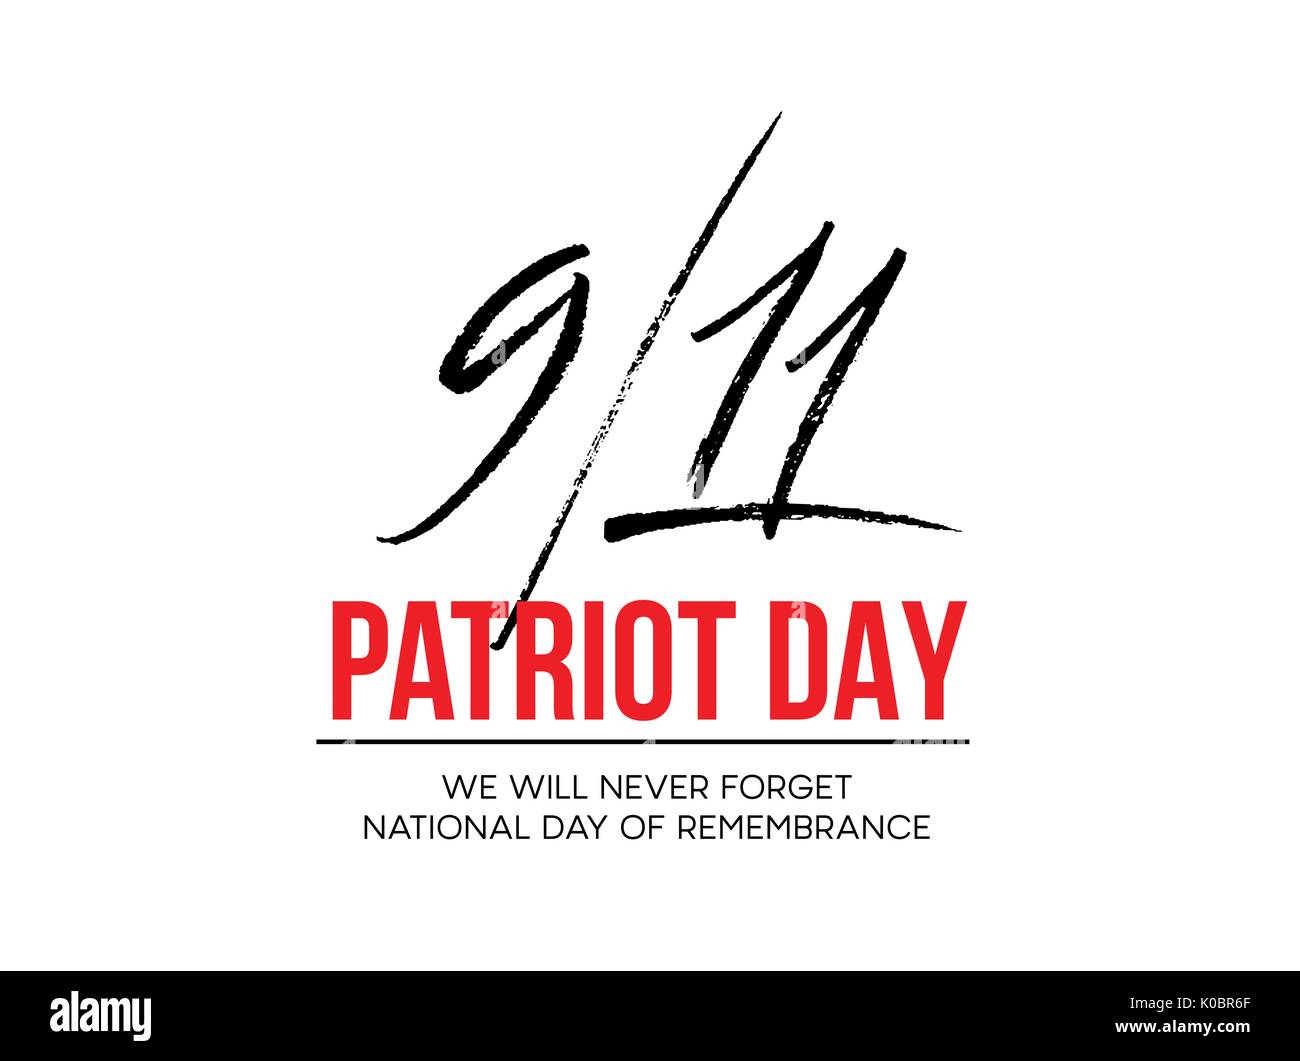 September 11, 2001 Patriot Day background. We Will Never Forget. background. Vector illustration Stock Vector